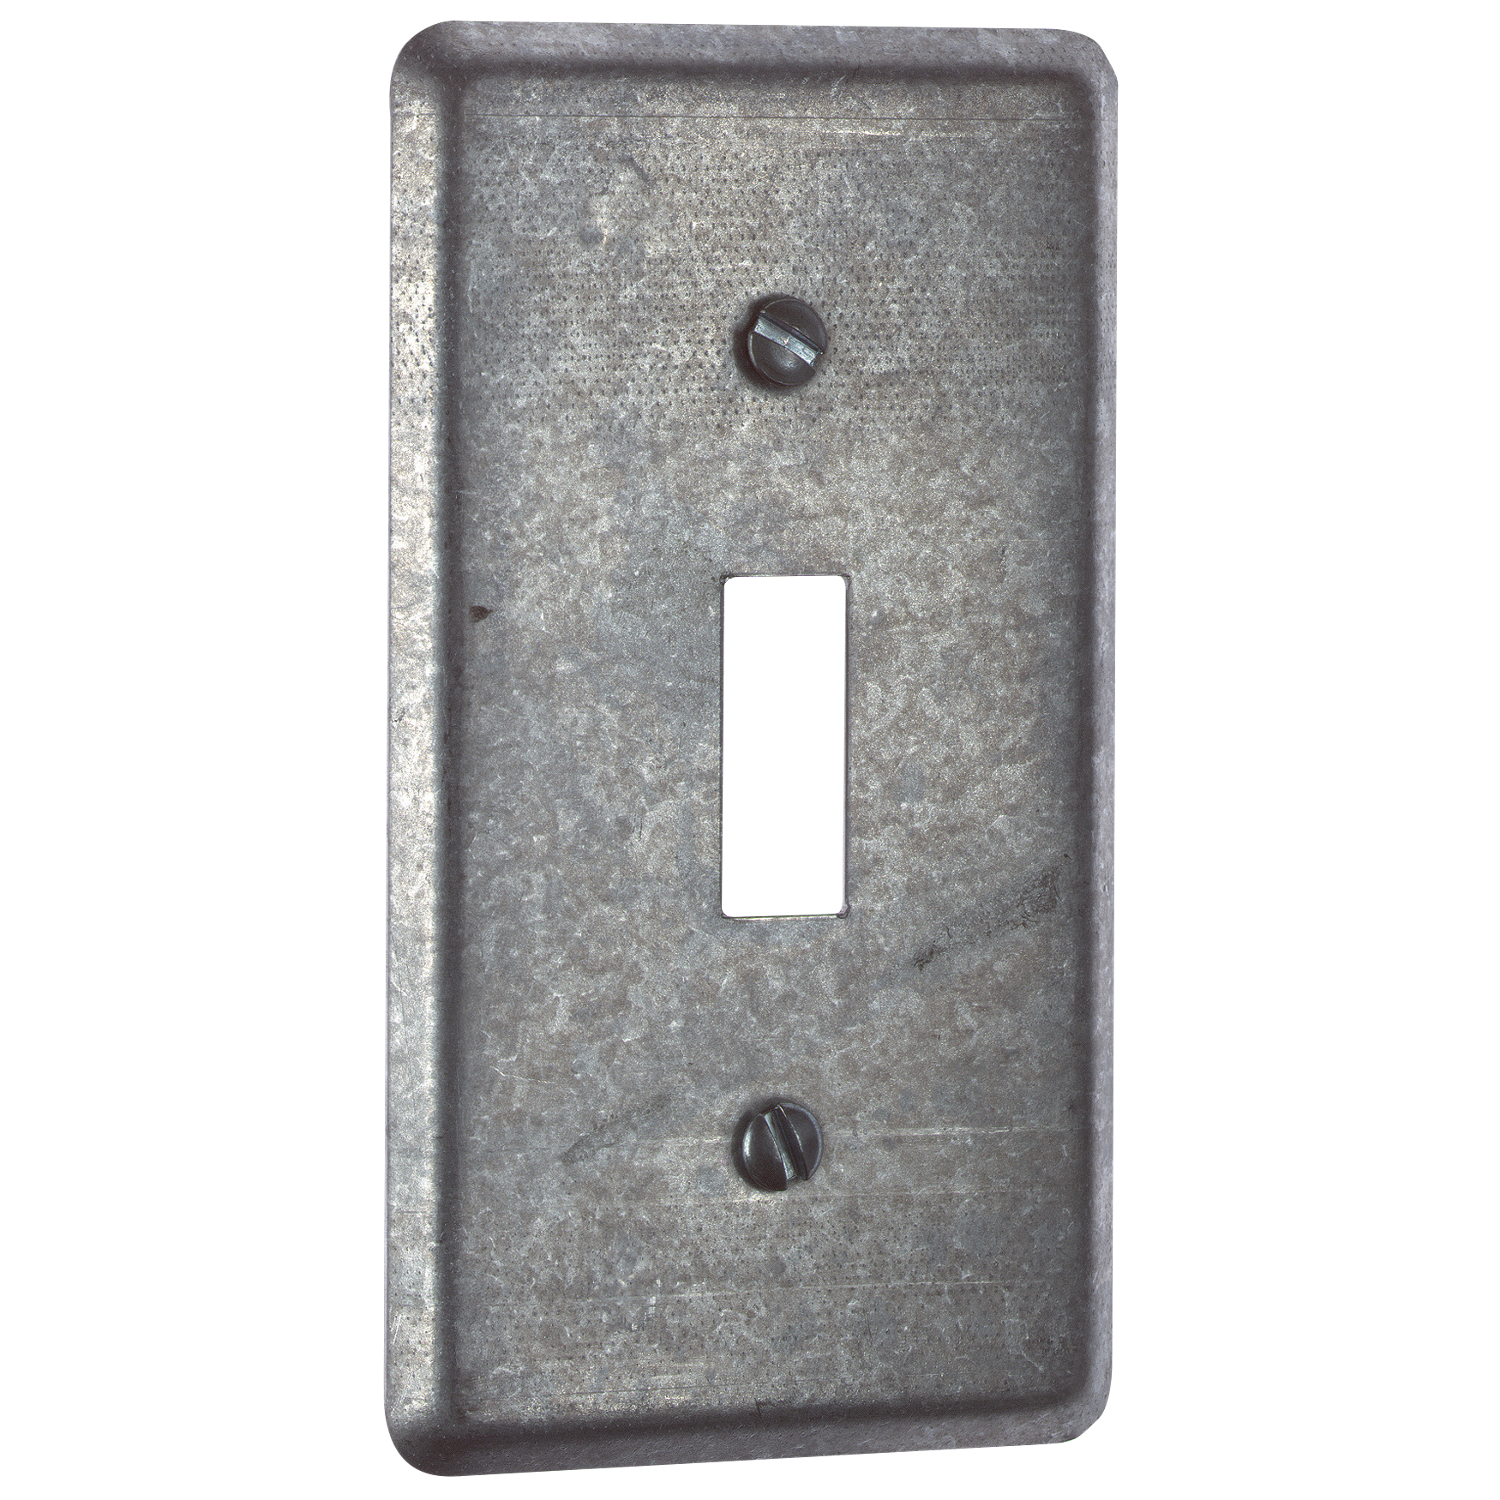 1G TOGGLE SWITCH HANDY BOX
STEEL COVER (10004, C1153)